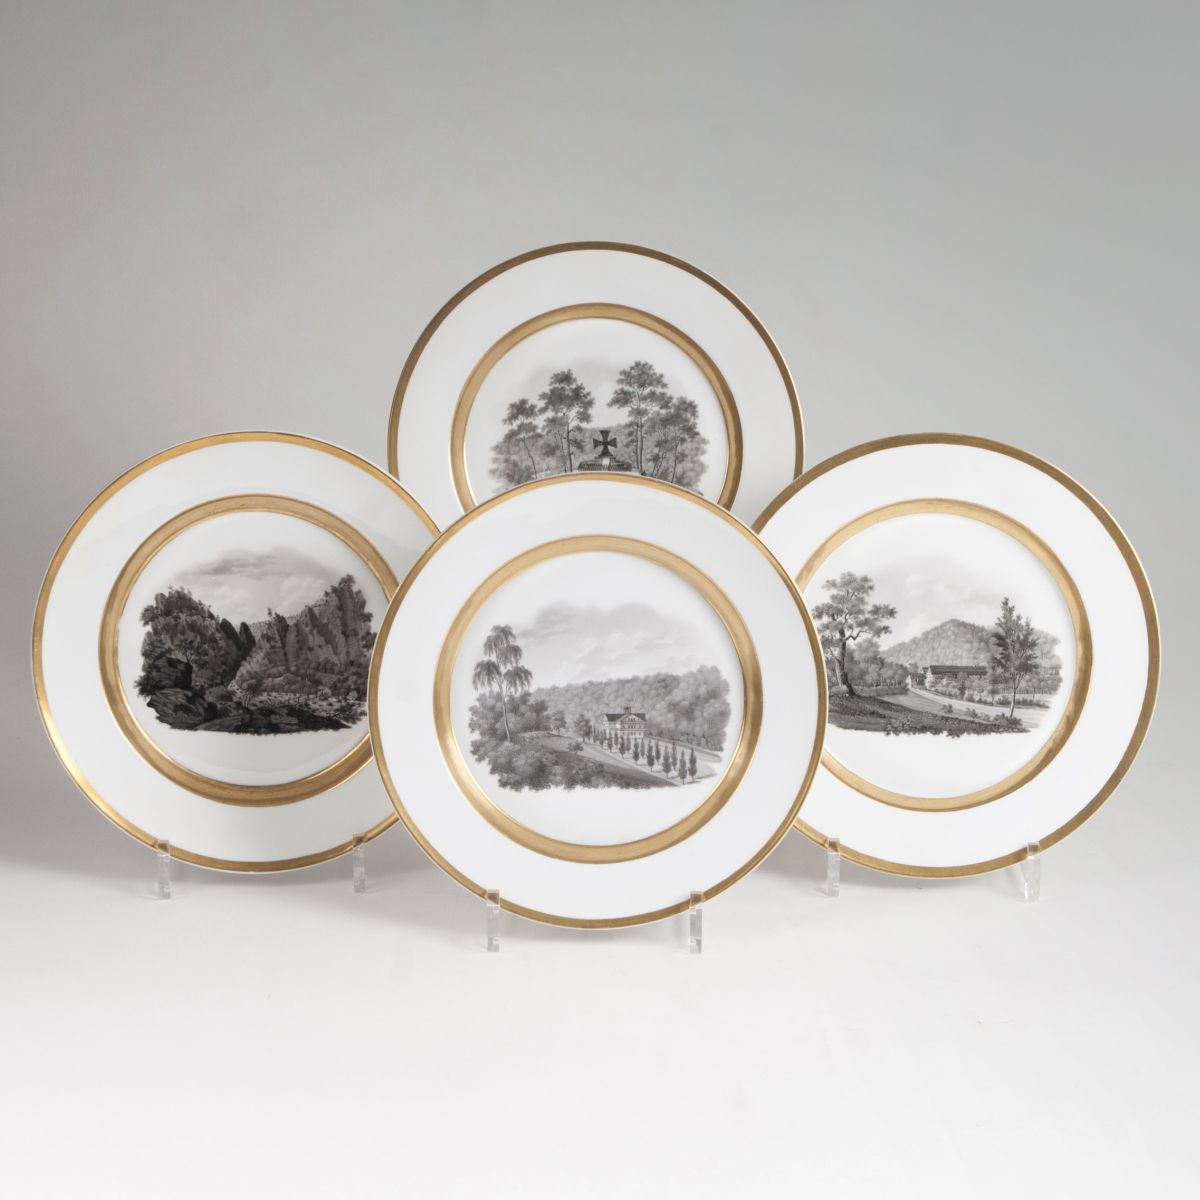 A set of 4 plates with landscape scenes in grisaille technique